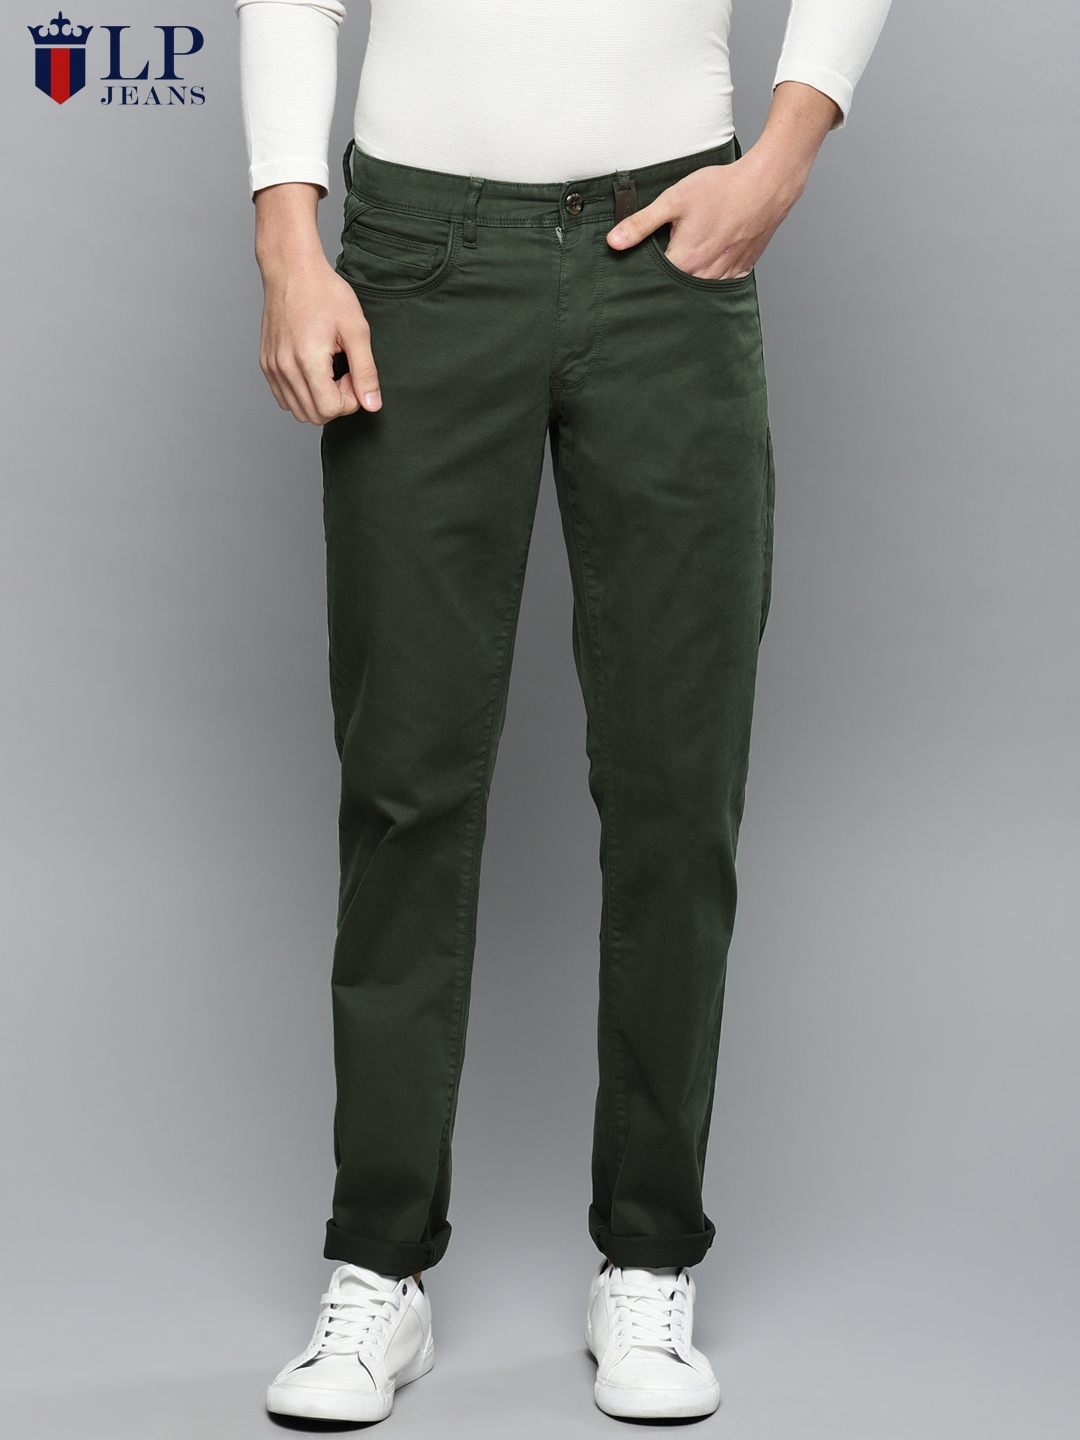 Buy Louis Philippe Jeans Men Olive Green Slim Fit Solid Chinos ...